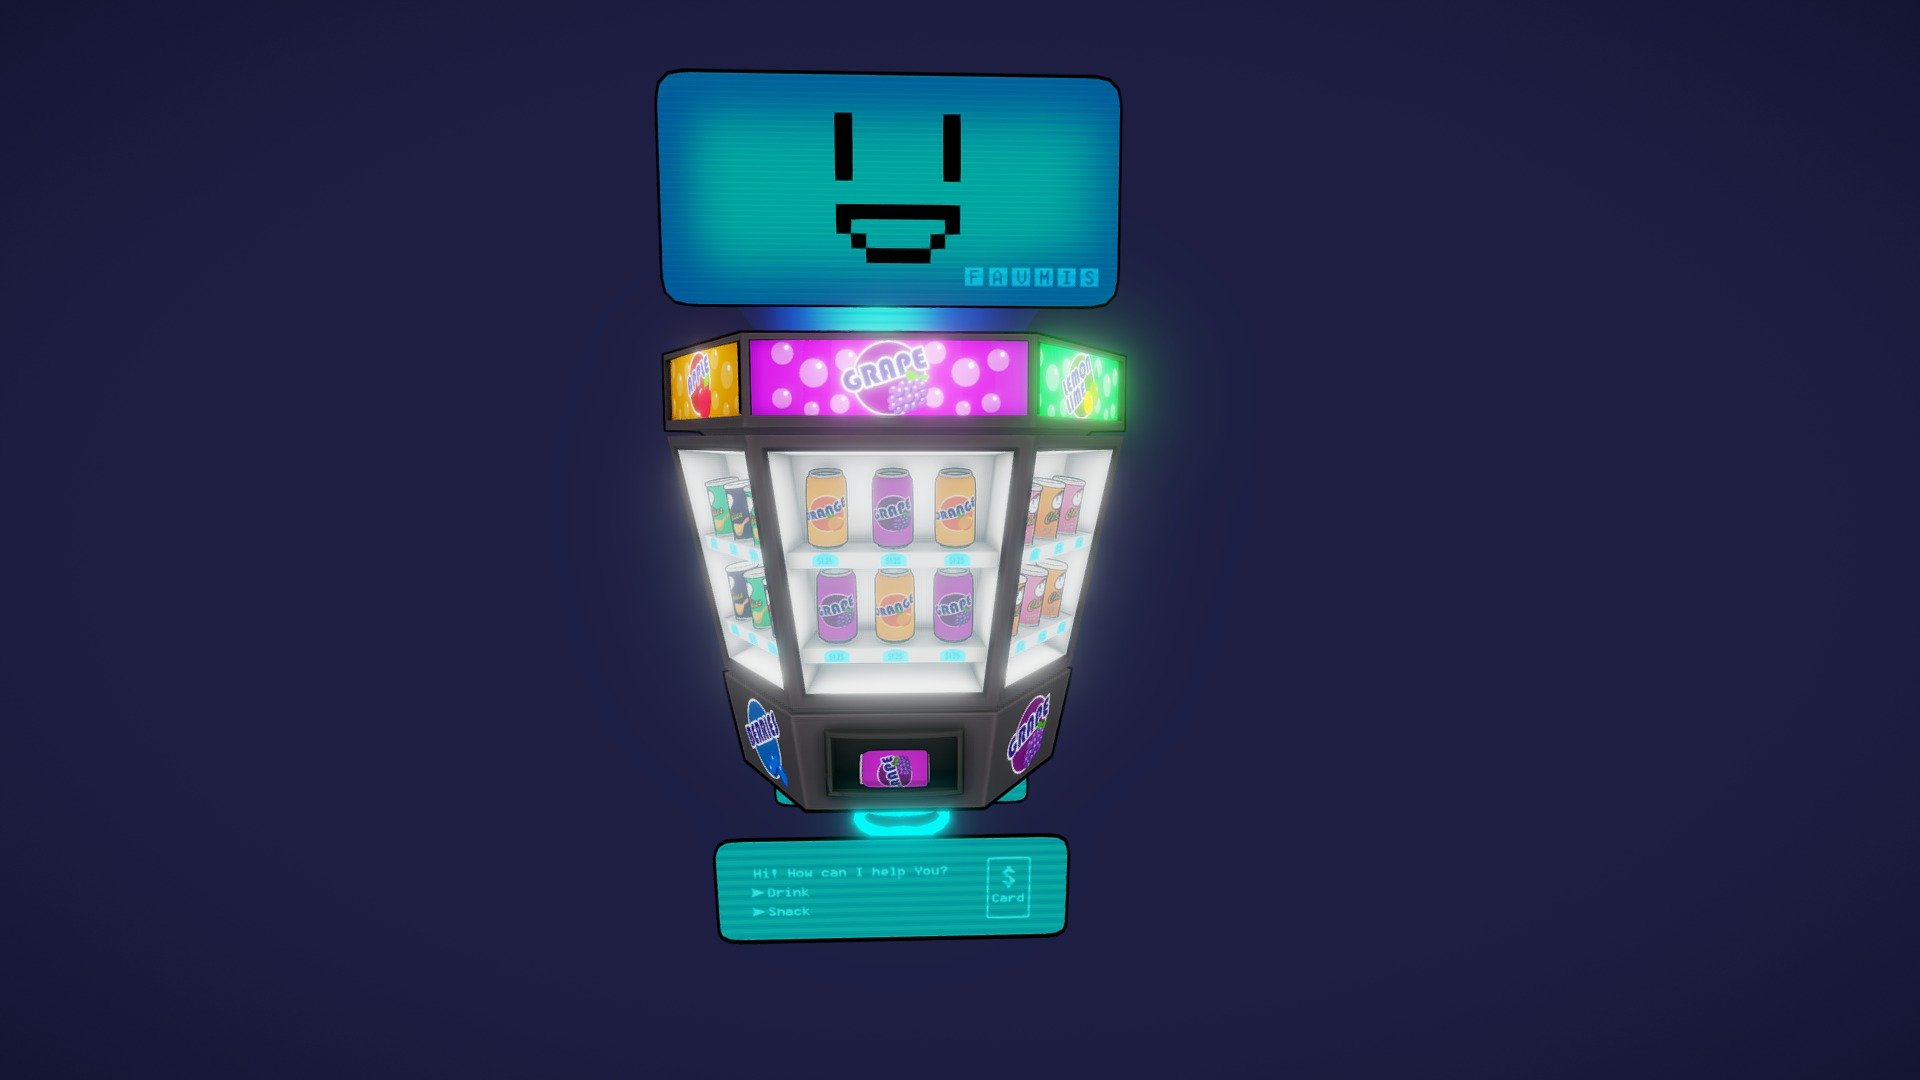 F.A.V.M.I.S or Friendly Automated Vending Machine Inteligent Service is the next innovation in vending machines.

Modeled in 3ds Max and Textured in Photoshop - F.A.V.M.I.S - 3D model by ErickCG 3d model